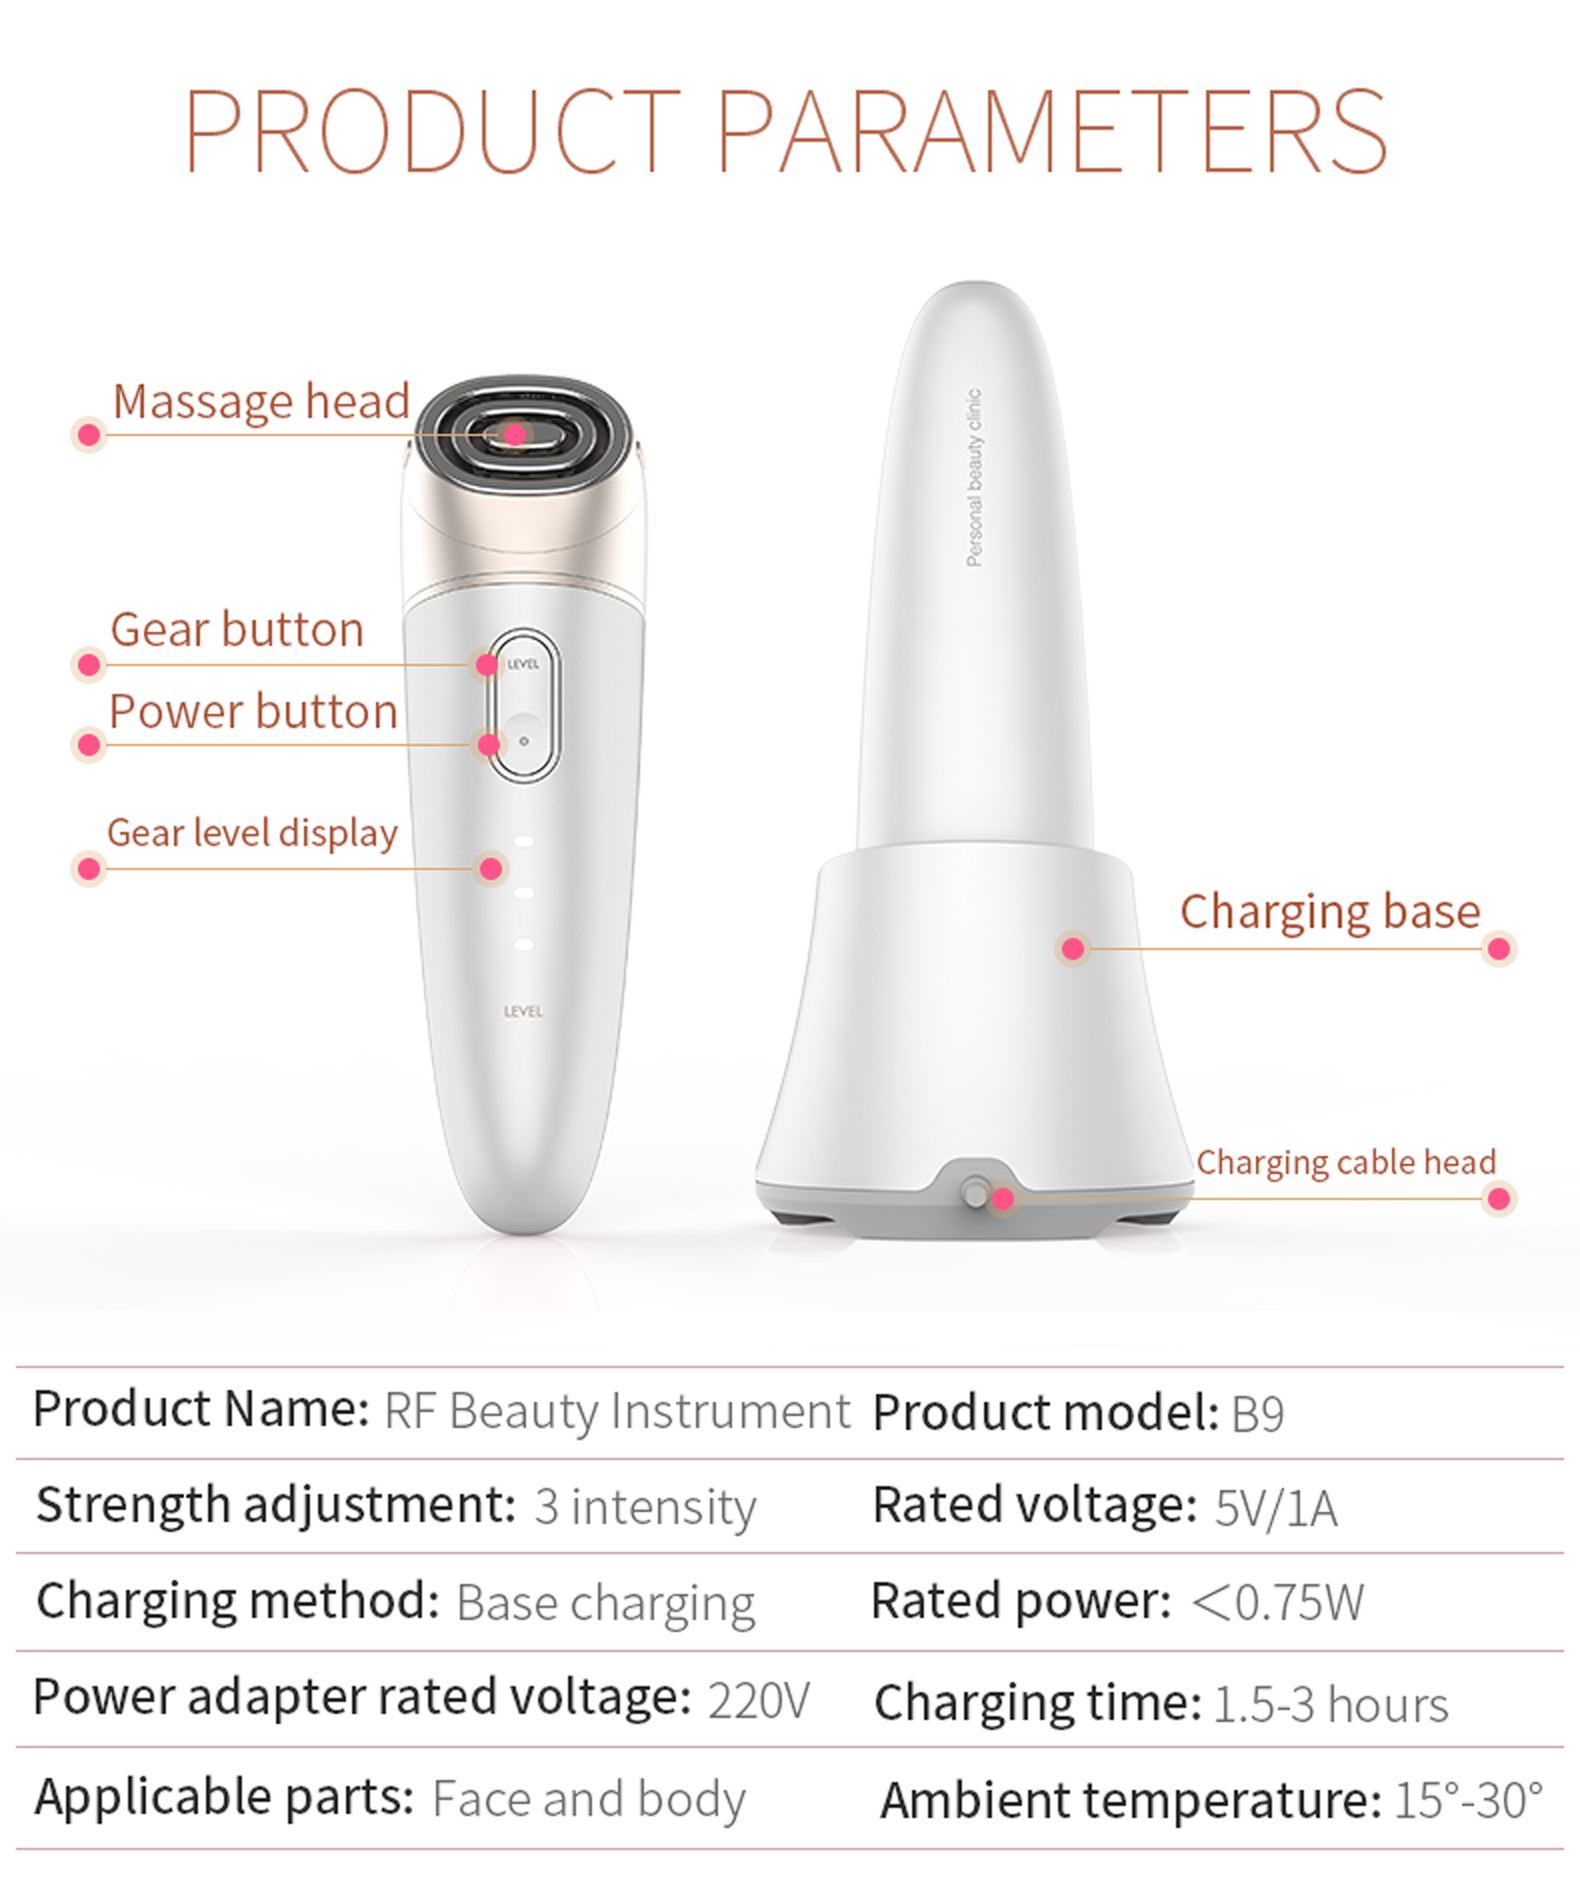 radio frequency aesthetic equipment,3 in 1 beauty instrument,rf & ems beauty instrument